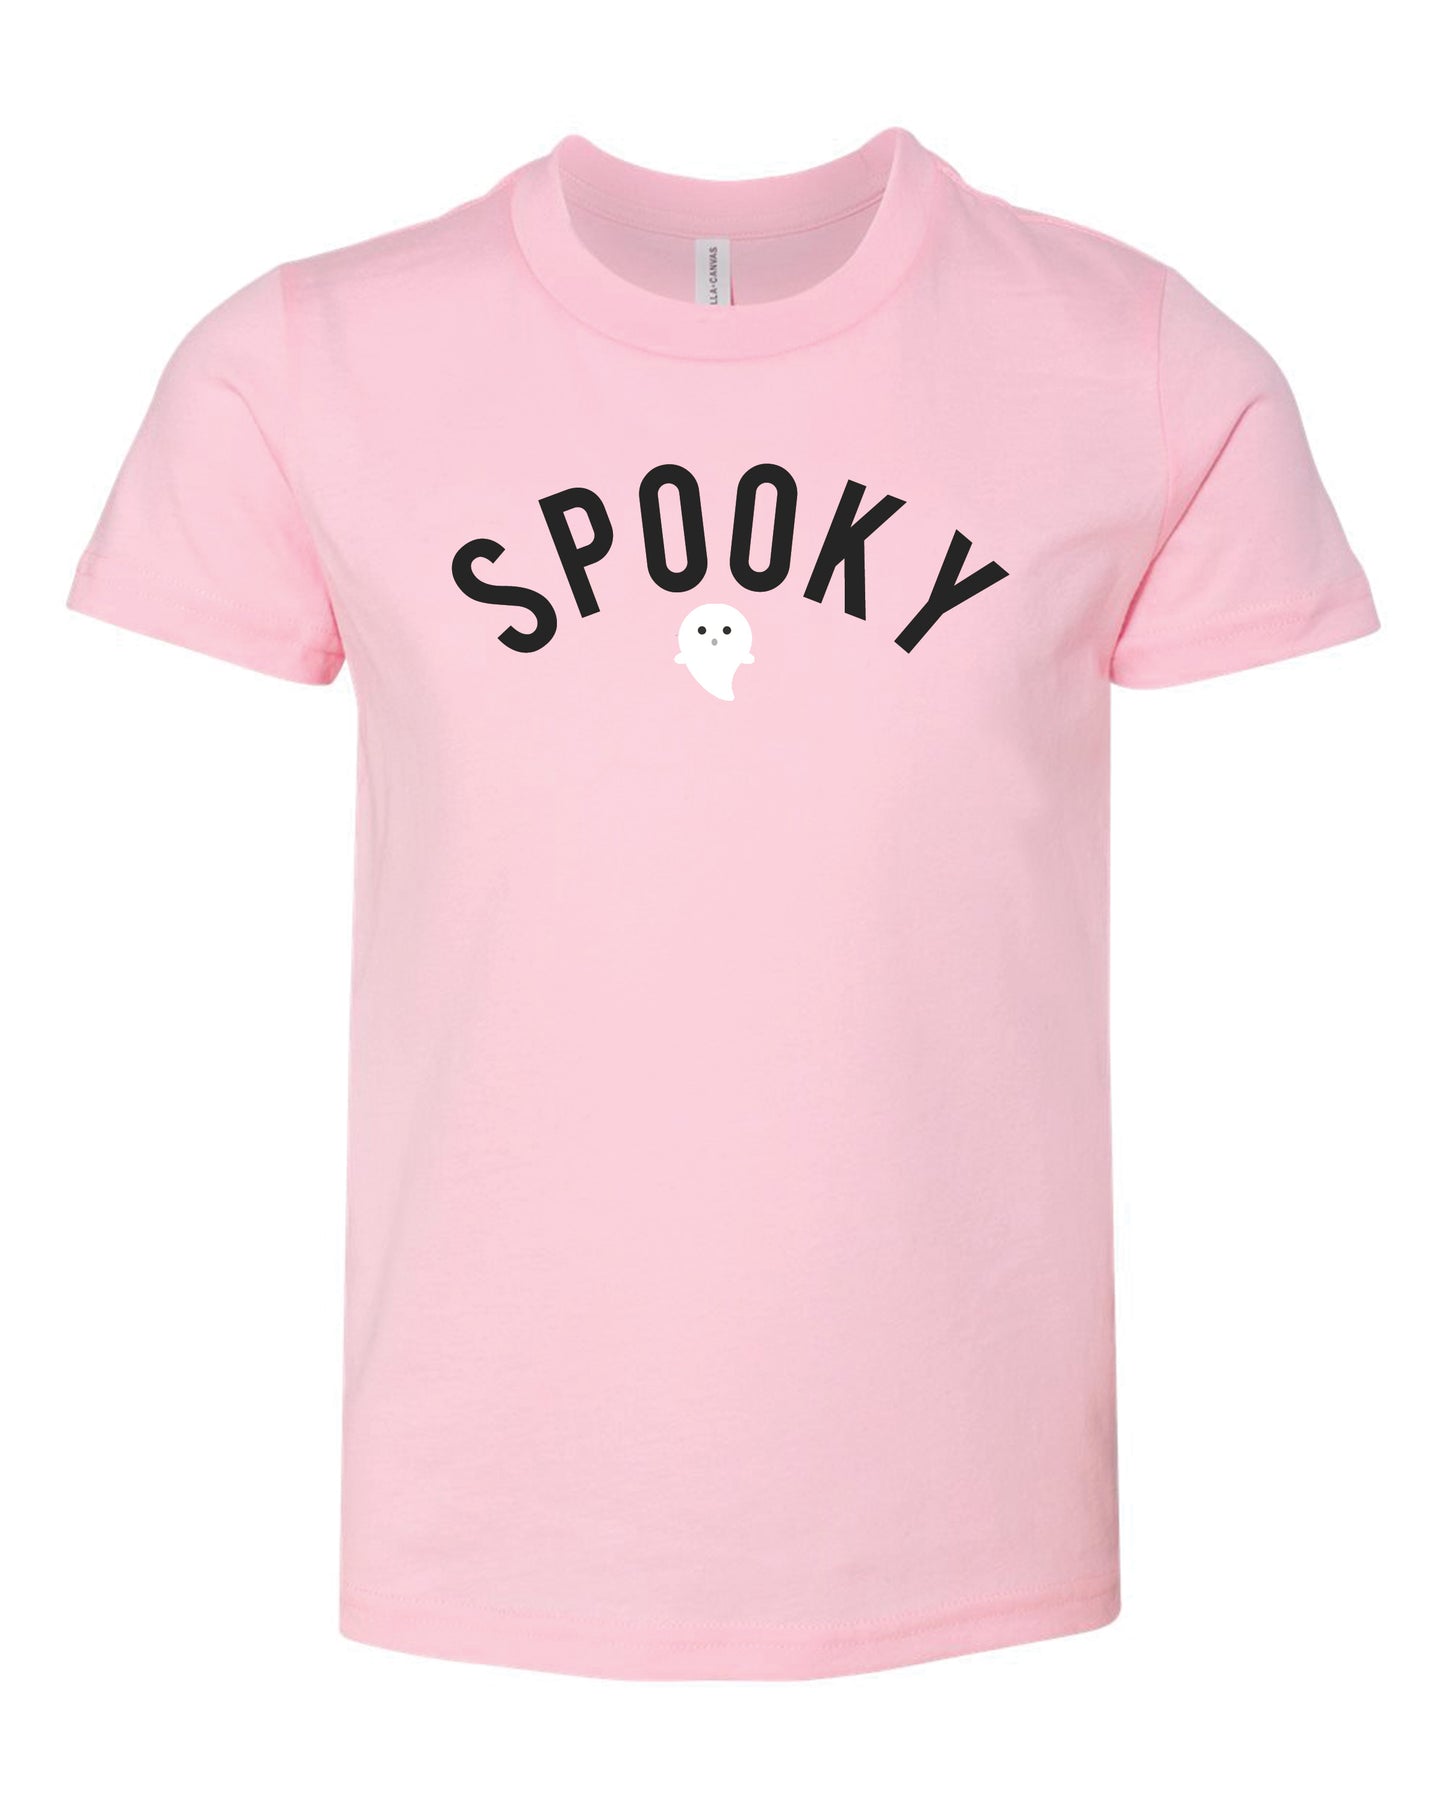 Spooky | Kids Tee-Kids Tees-Sister Shirts-Sister Shirts, Cute & Custom Tees for Mama & Littles in Trussville, Alabama.